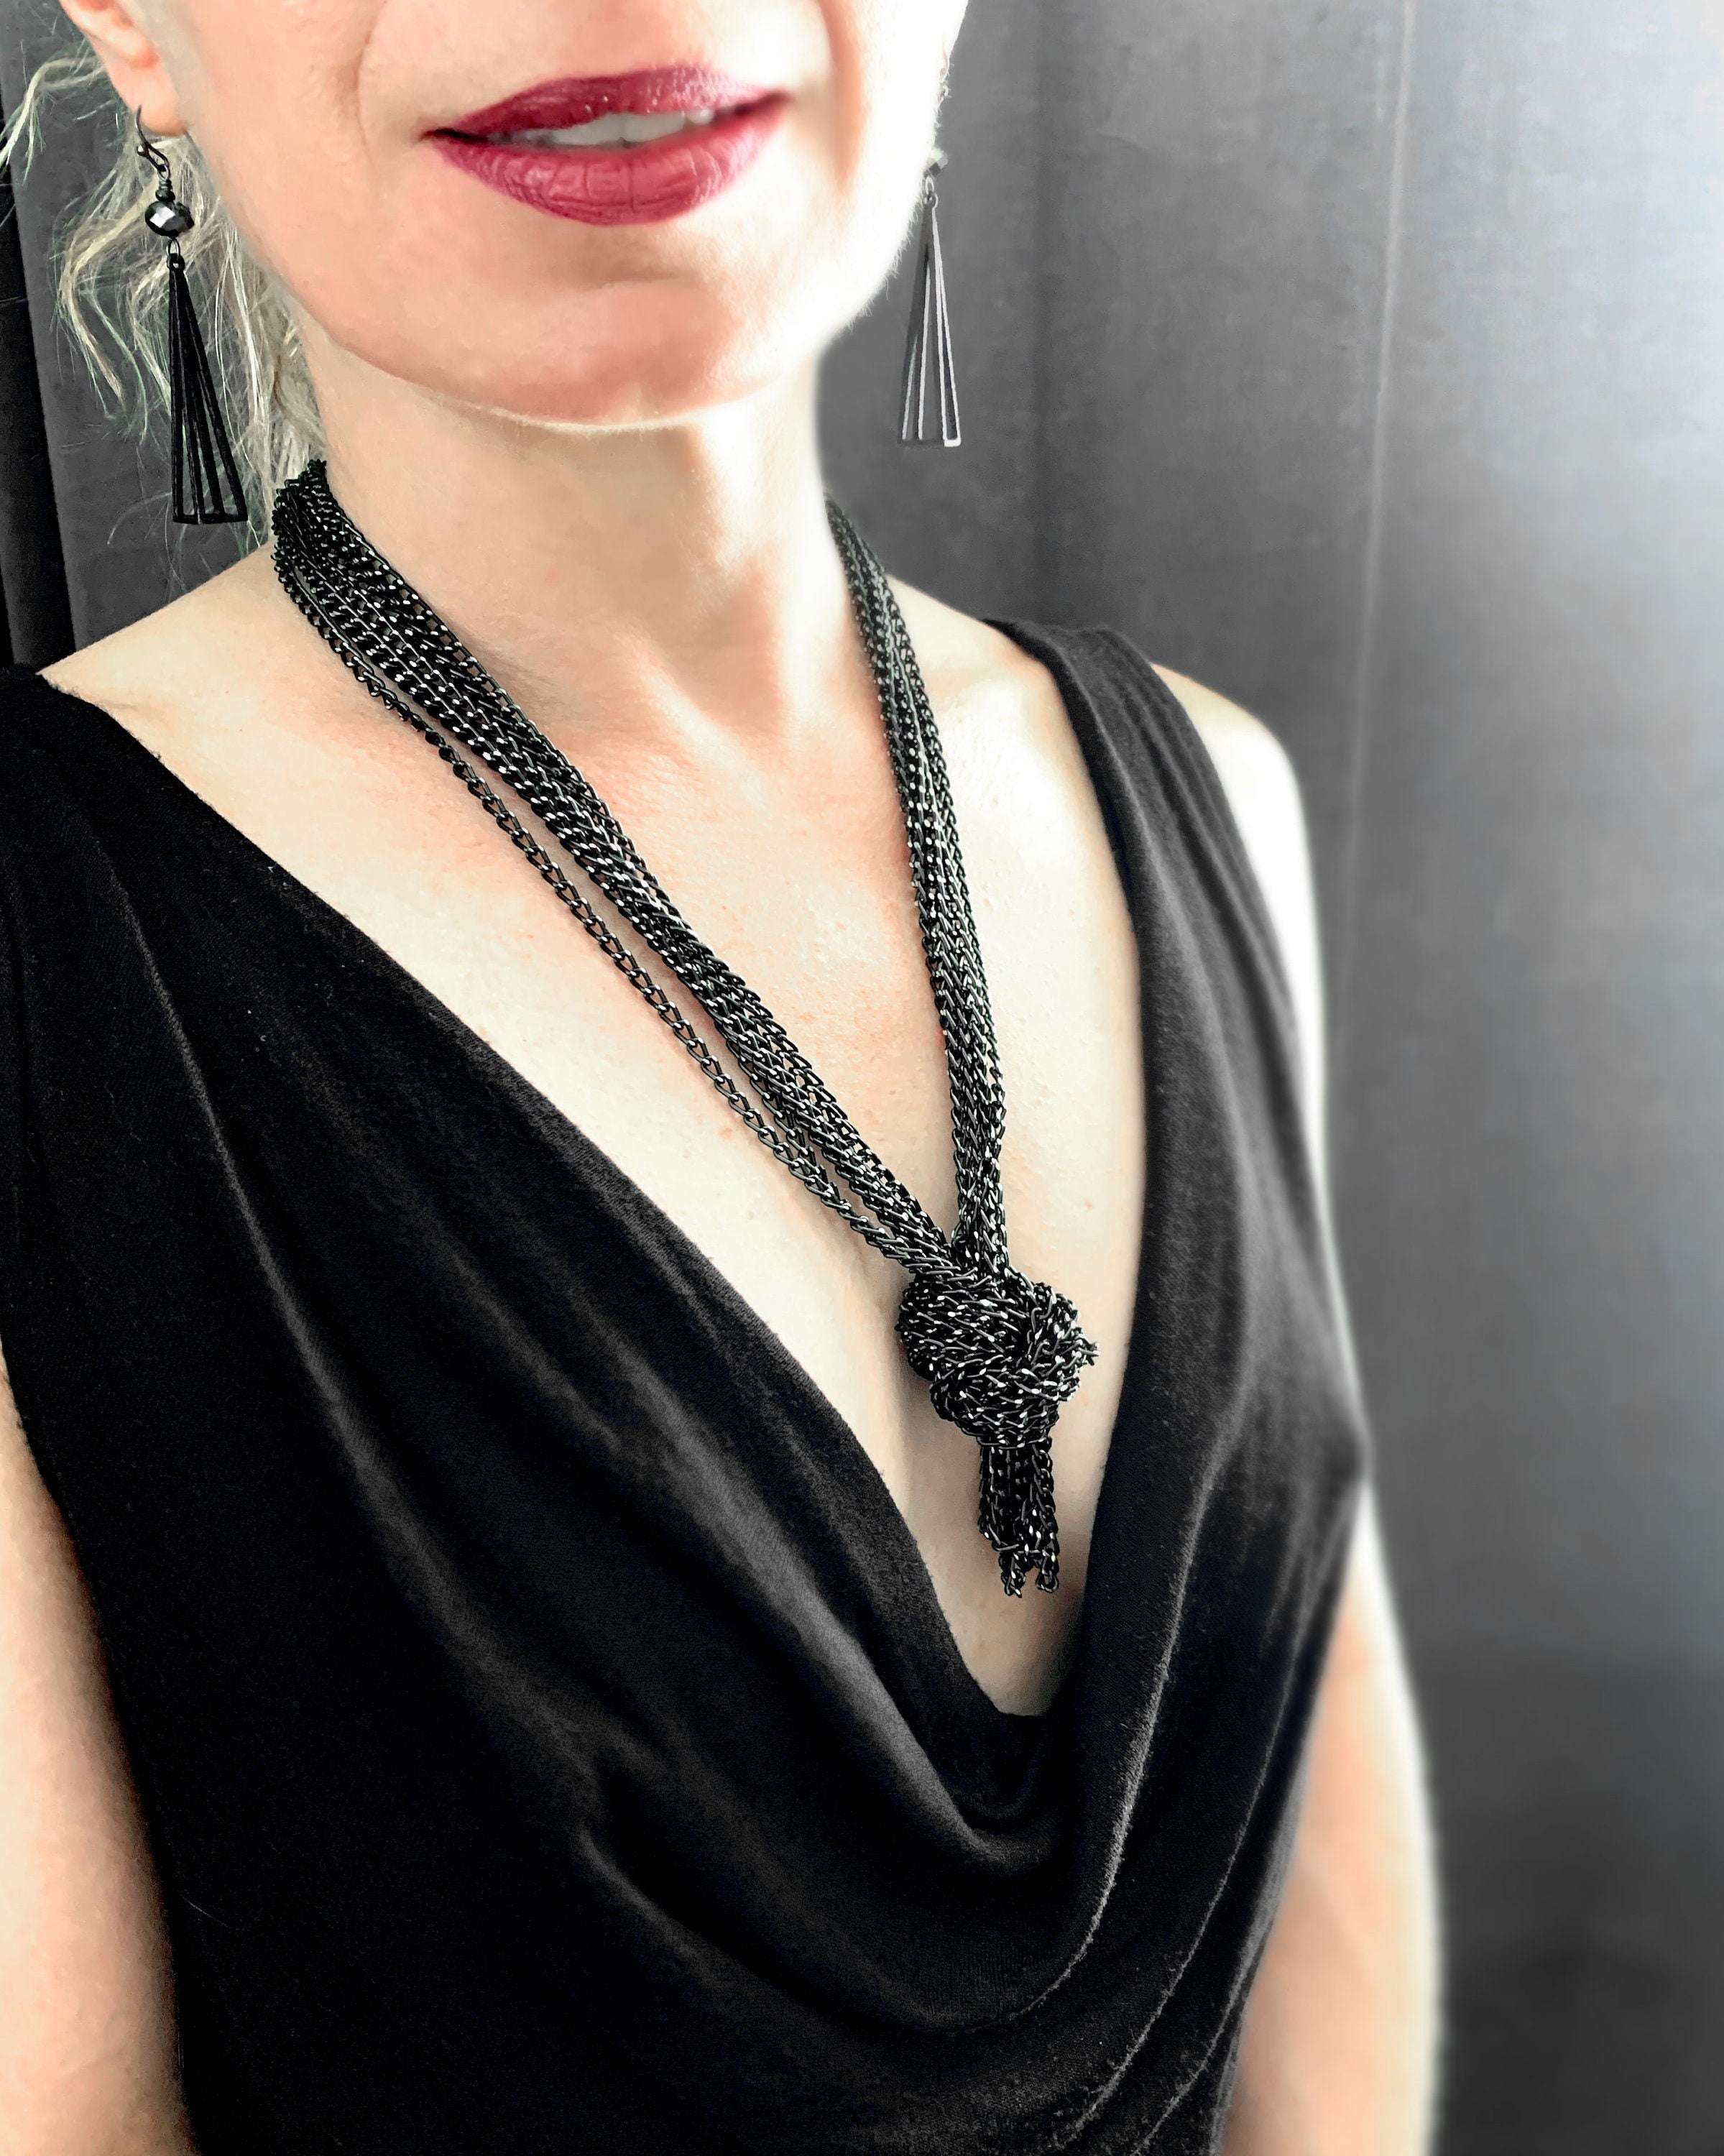 Long 7-Strand Black and Silver Chain Necklace w Geometric Circles - Convertible Design: Wear Long, Doubled, Tied or as Wrap Chain Bracelet